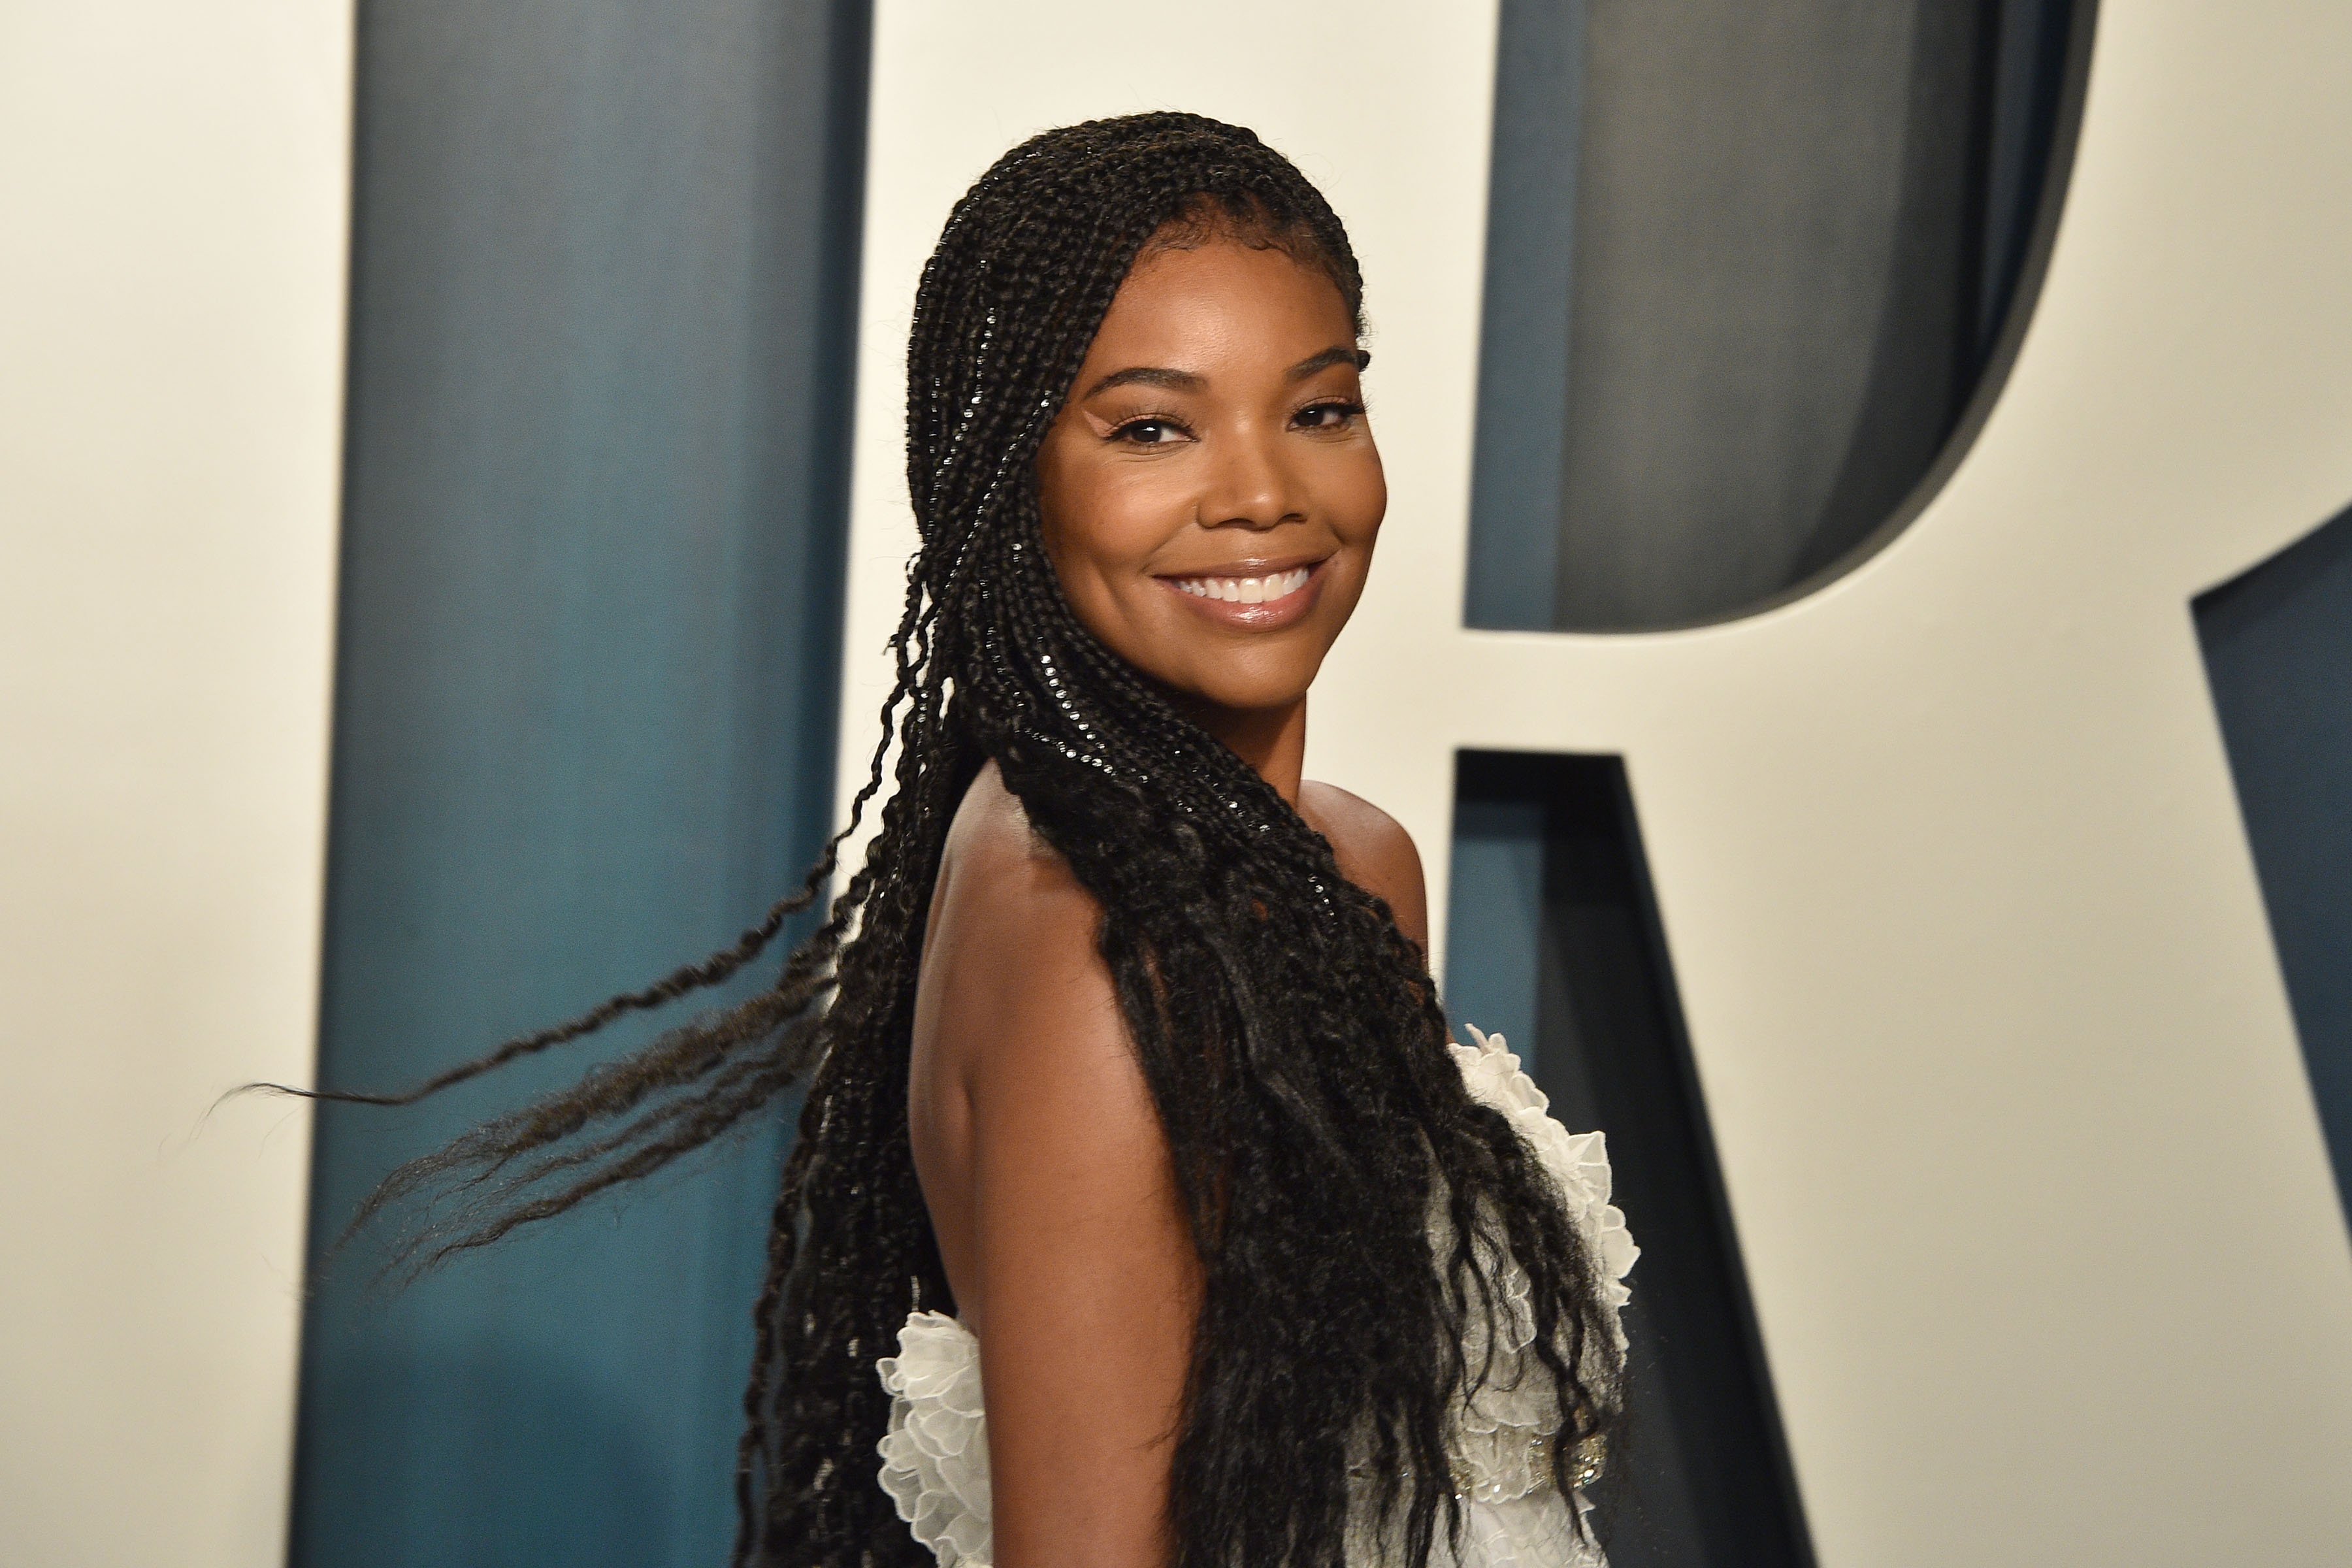 Gabrielle Union at the 2020 Vanity Fair Oscar Party at Wallis Annenberg Center for the Performing Arts on February 09, 2020 in Beverly Hills, California. | Source: Getty Images